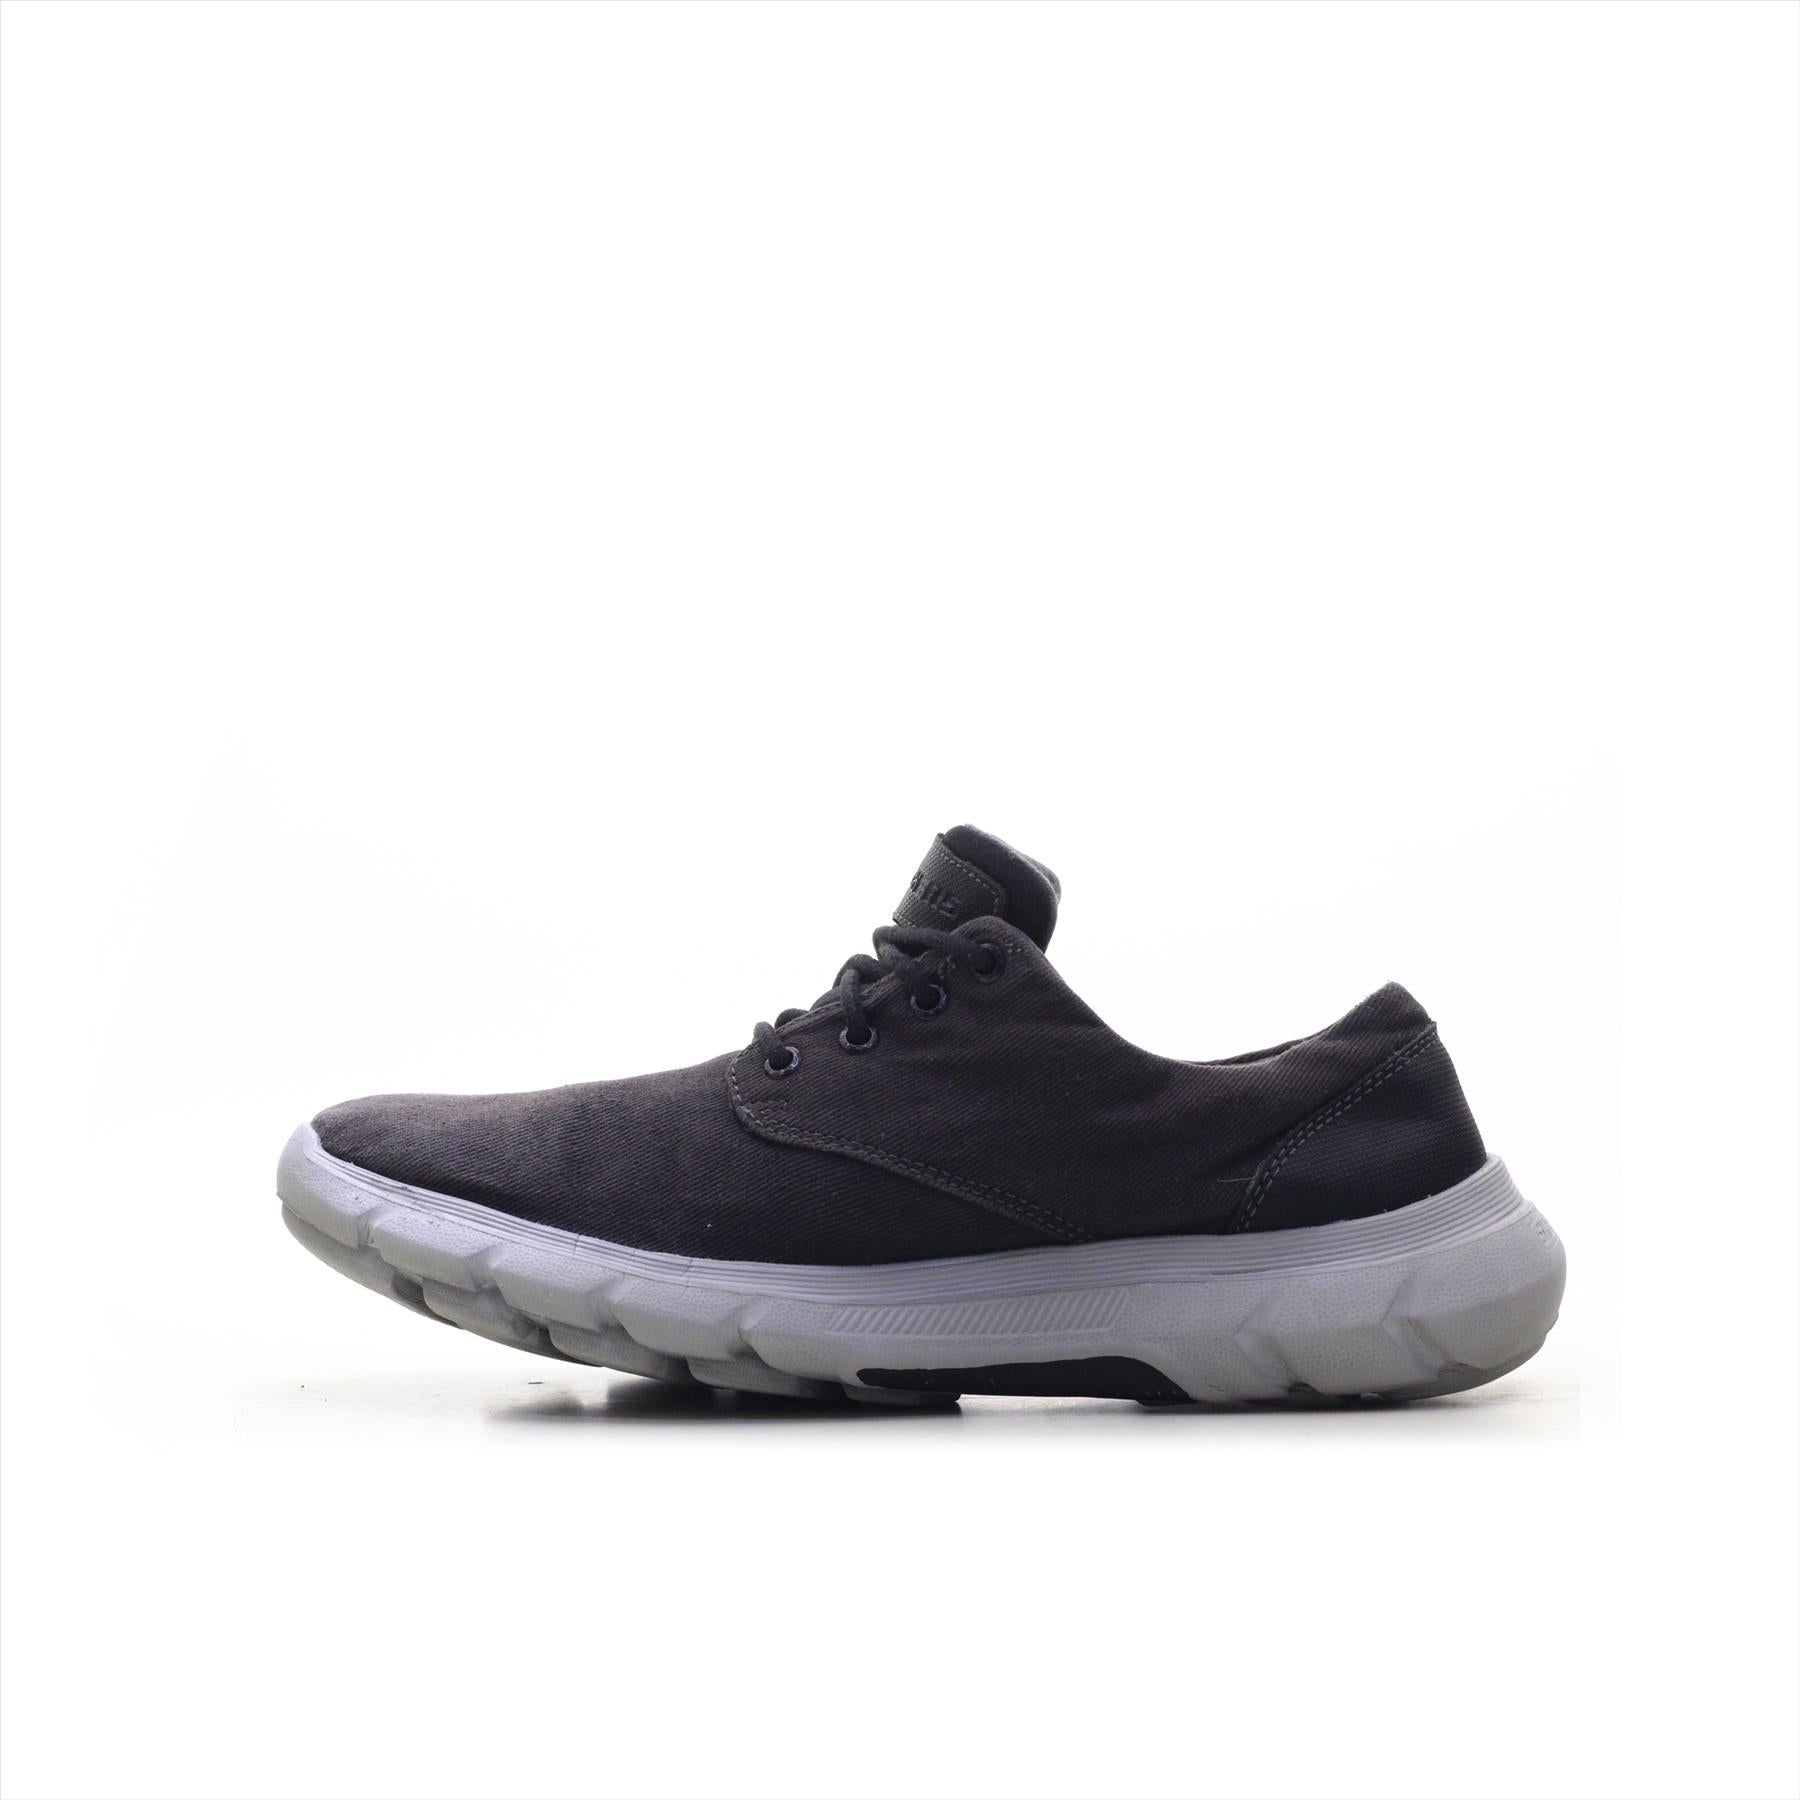 skechers relaxed air cooled memory foam